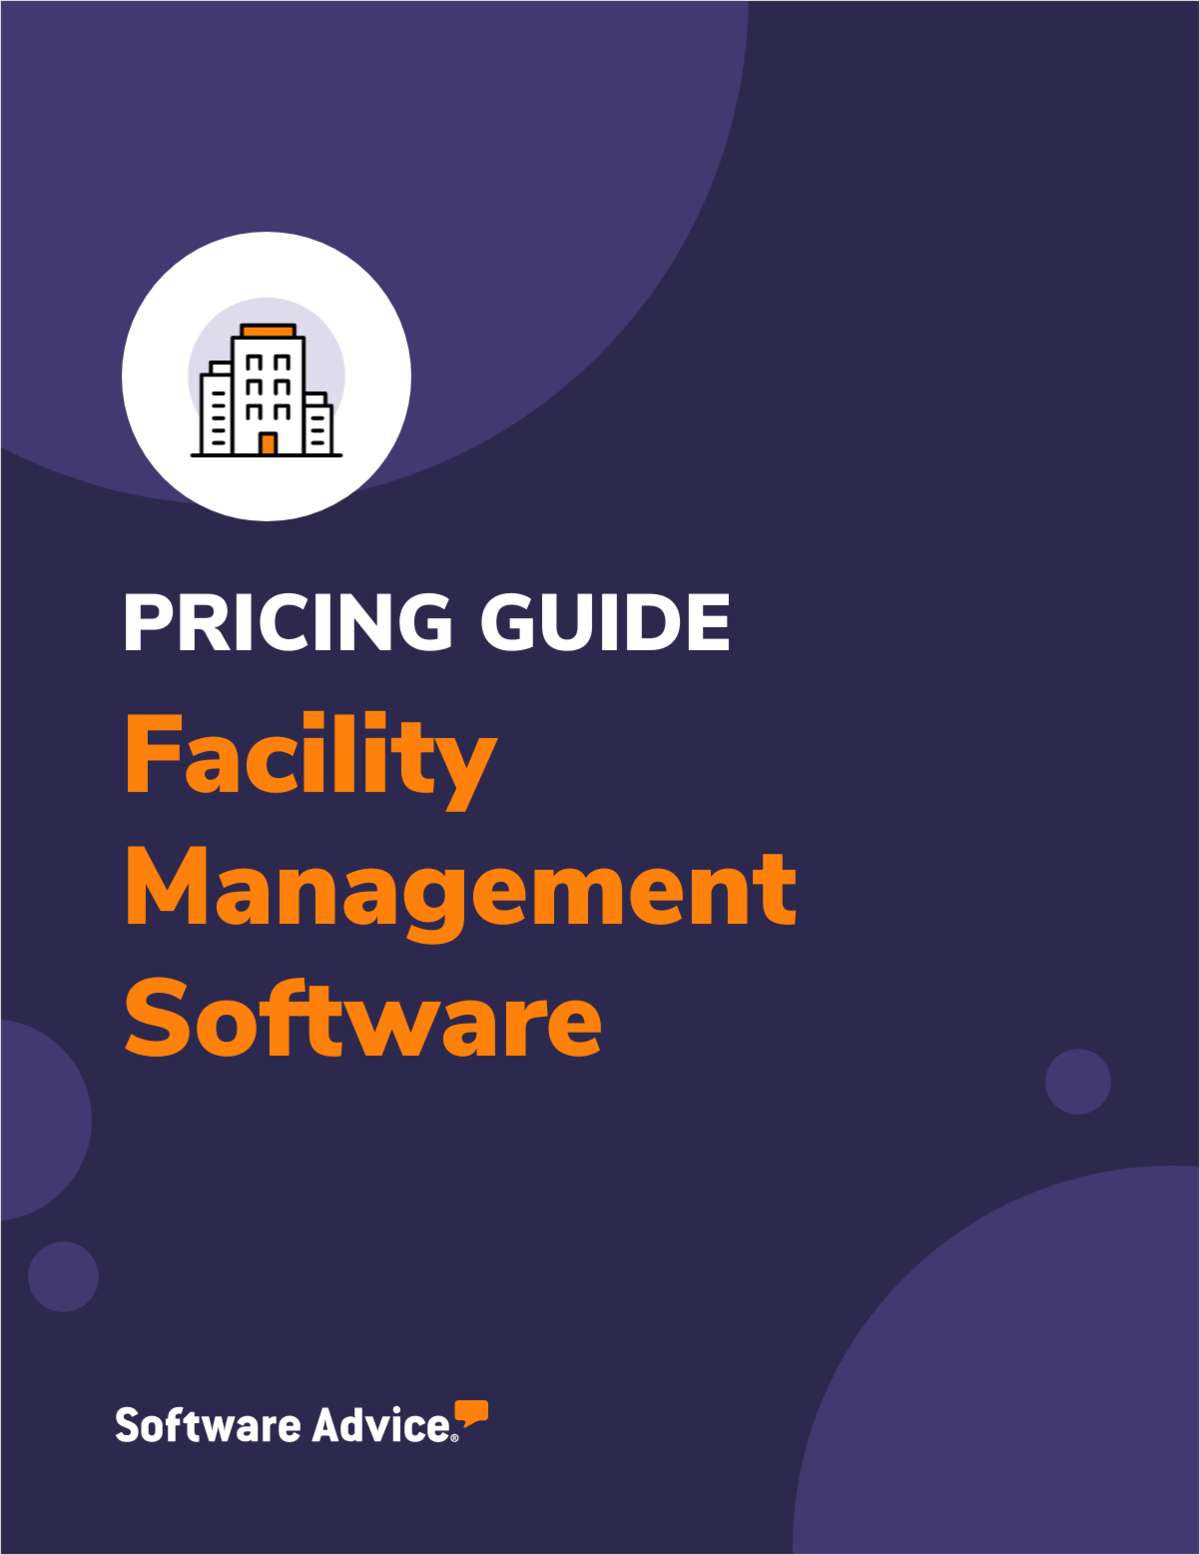 Facility Management Software Pricing Guide